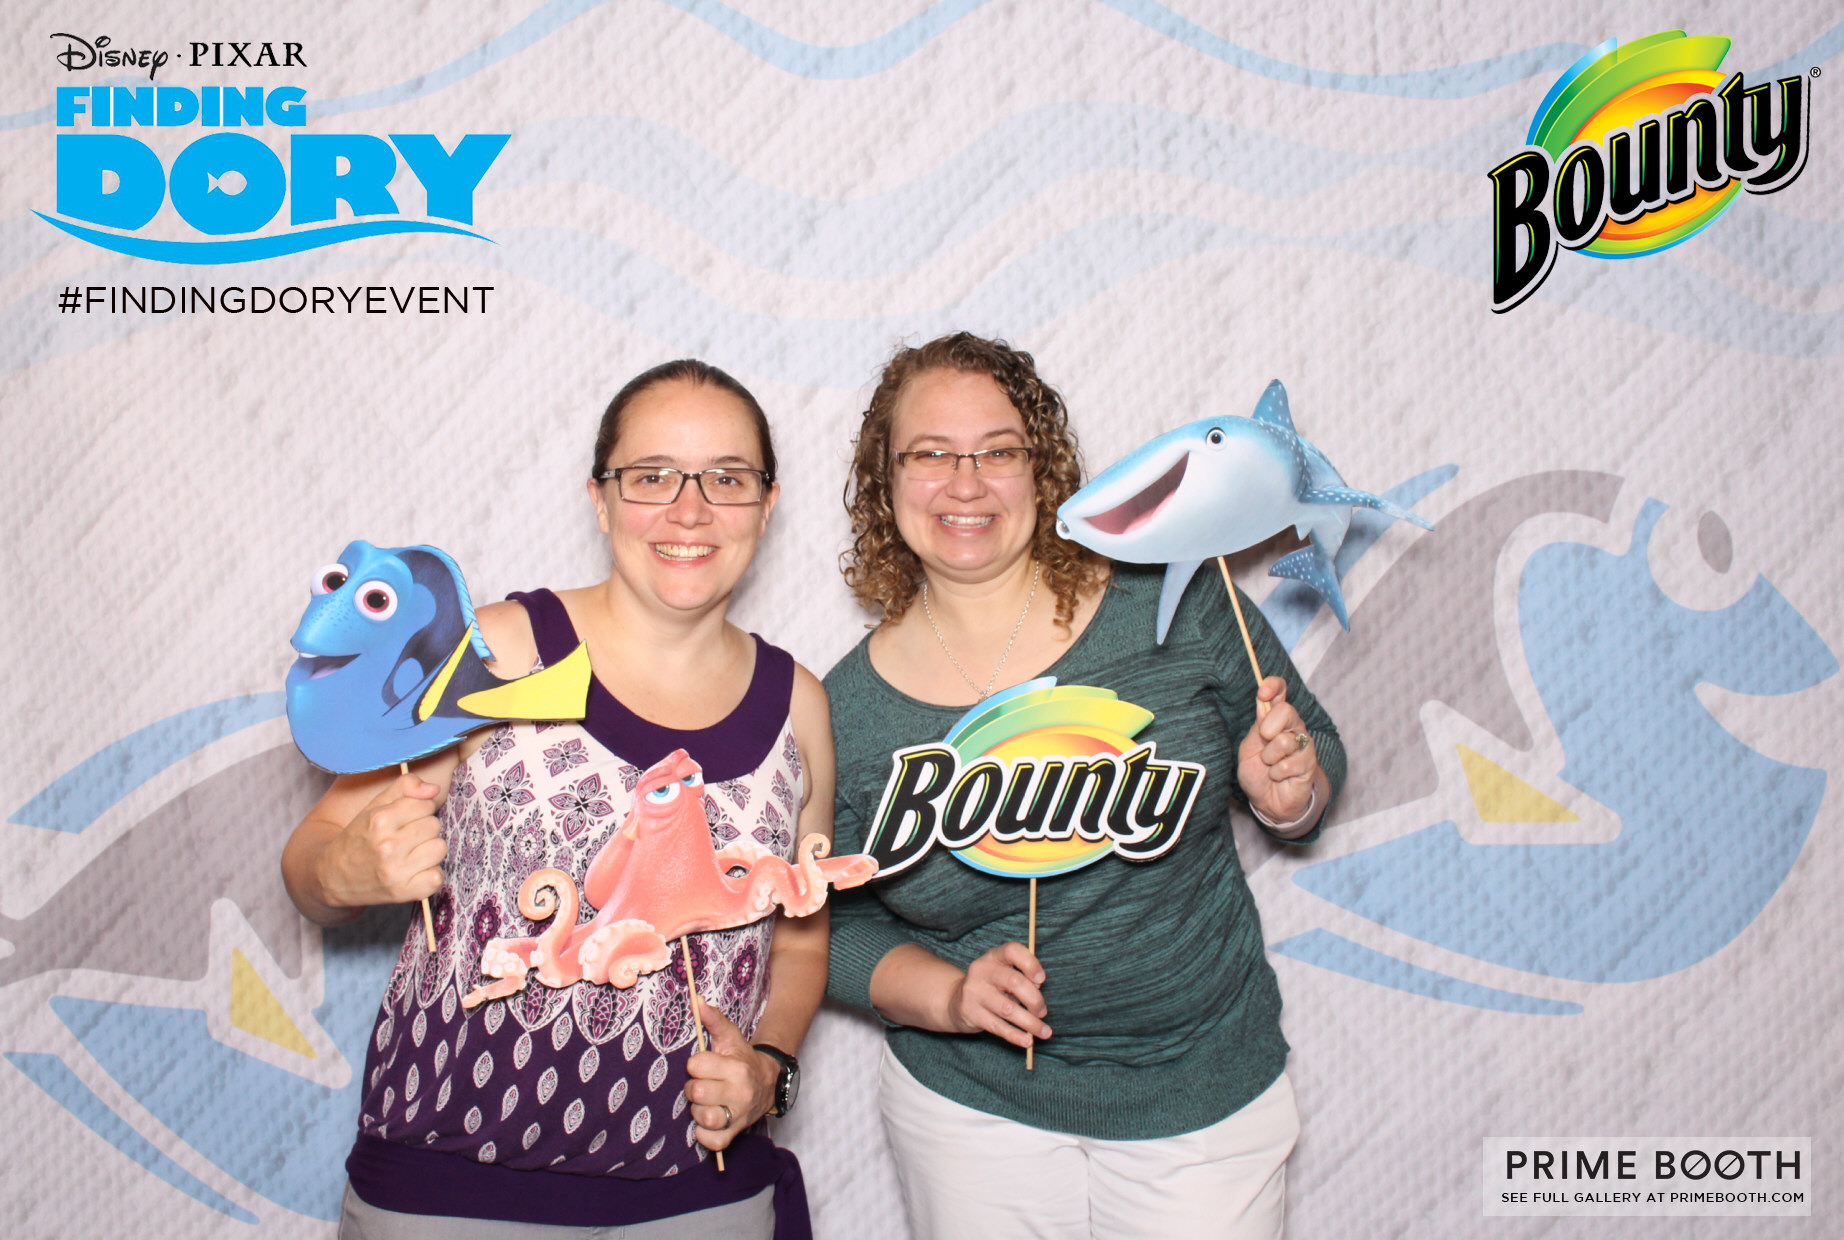 Even Bounty is celebrating FINDING DORY #FindingDoryEvent